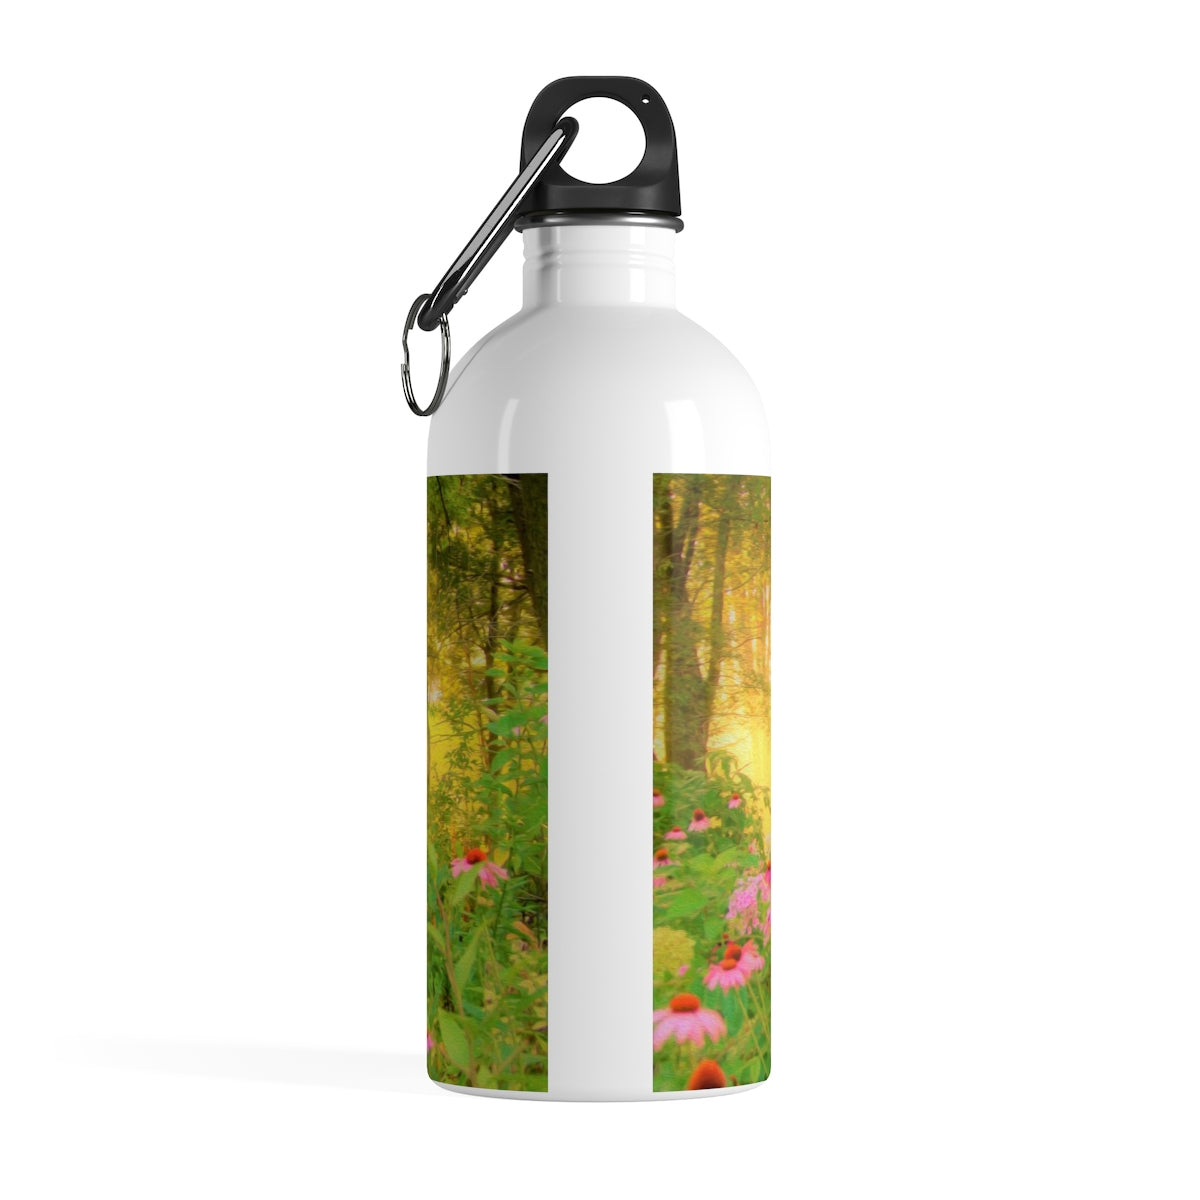 Stainless Steel Water Bottle, Golden Sunrise with Pink Coneflowers in My Garden